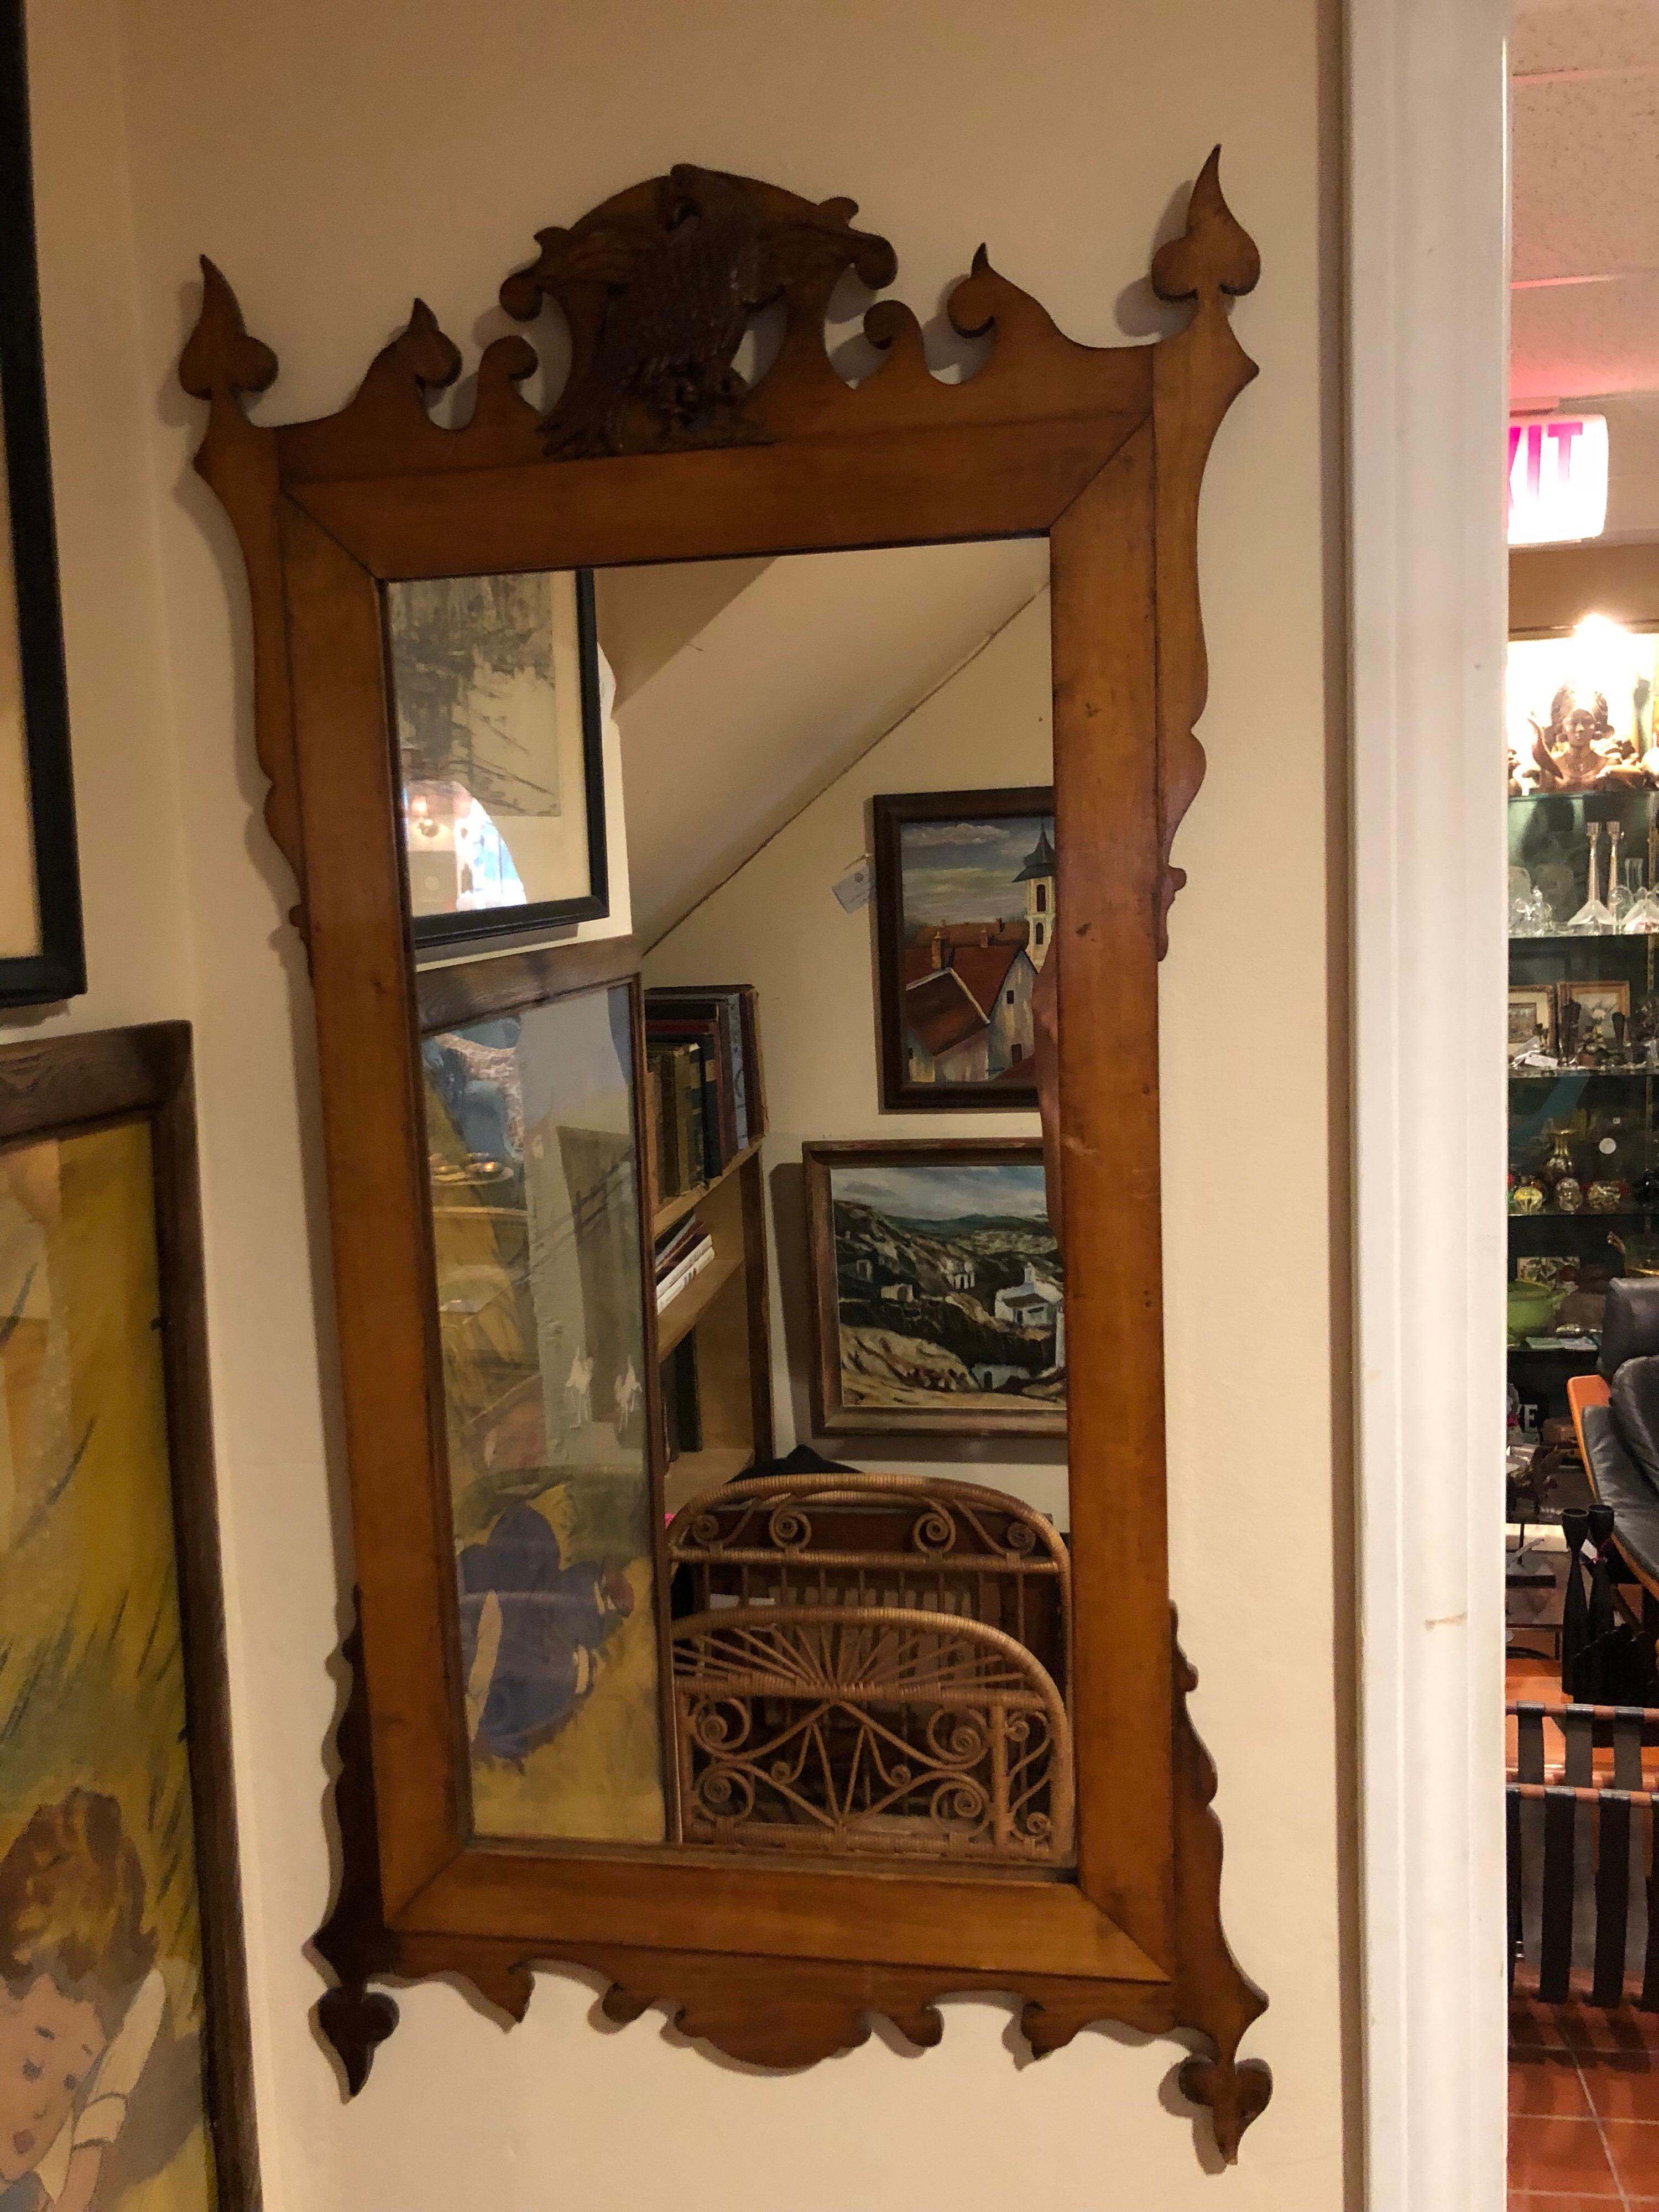 Federal carved wooden mirror with eagle perfect for a narrow hallway or a small bathroom. Made of carved maple wood with a two toned finish. Some pieces of wood are darker and some lighter which makes a nice contrast. Unusual lines make up this fun